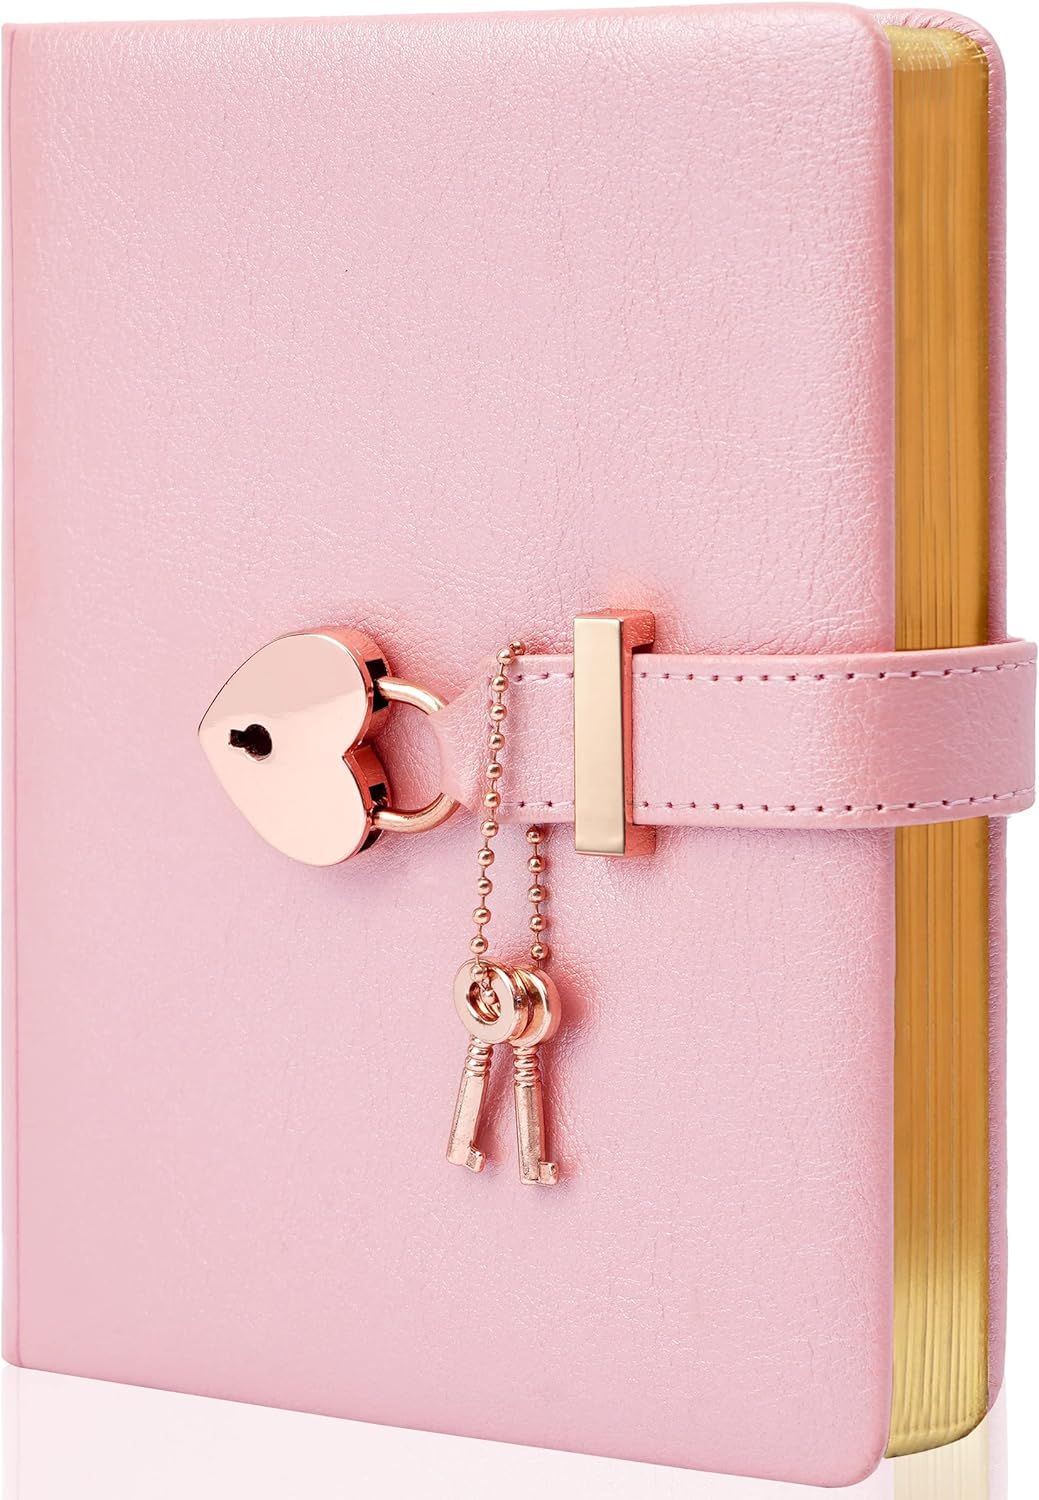 CAGIE Lock Diary for Girls with 2 Keys, Diary with Lock for Girls ages 8-12, Heart-Shaped Locked ... | Amazon (US)